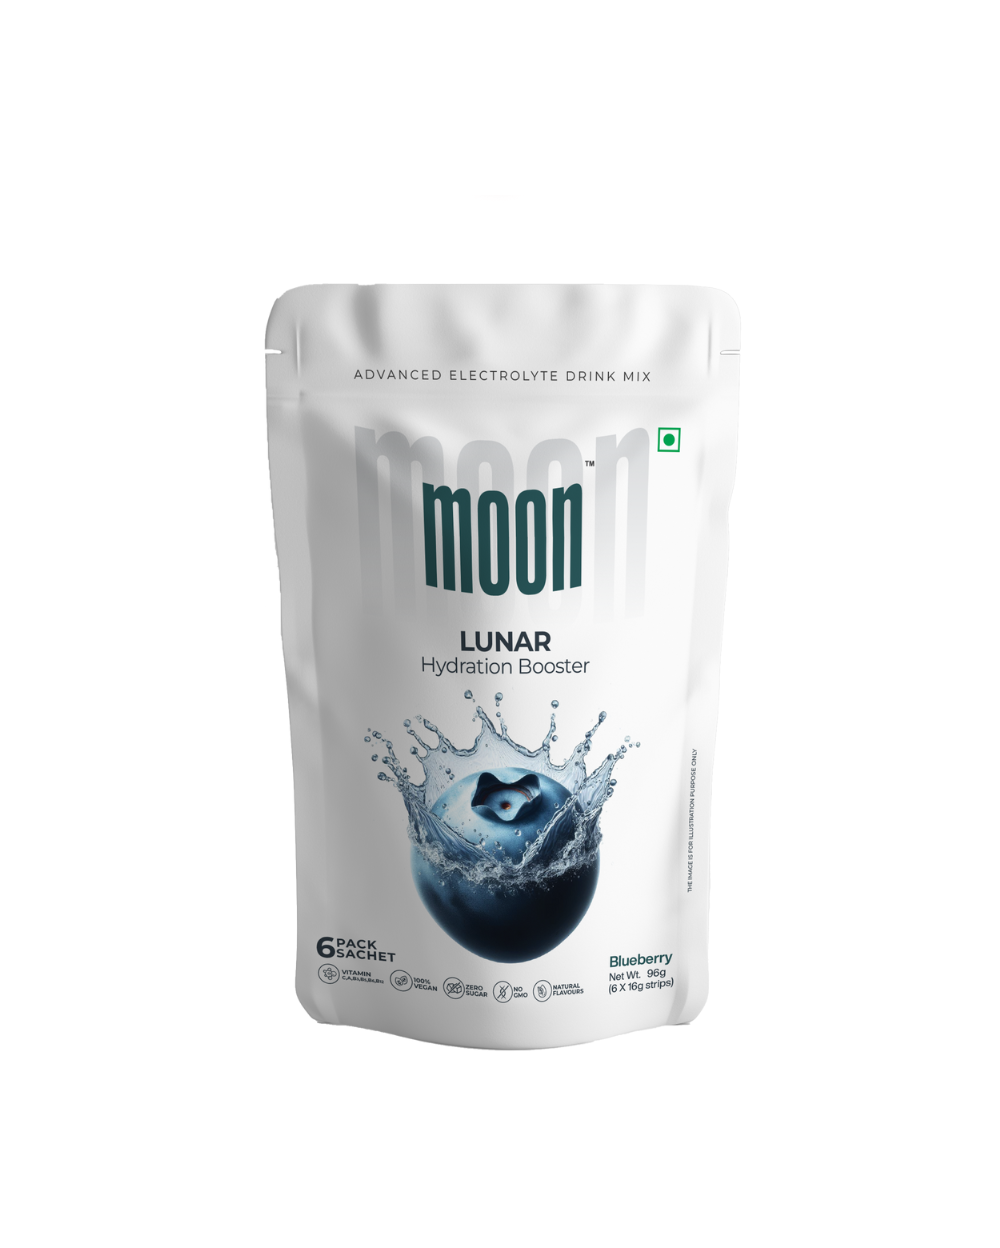 Product description: A pouch of Moon Blueberry Lunar Hydration Booster powder on a white background.